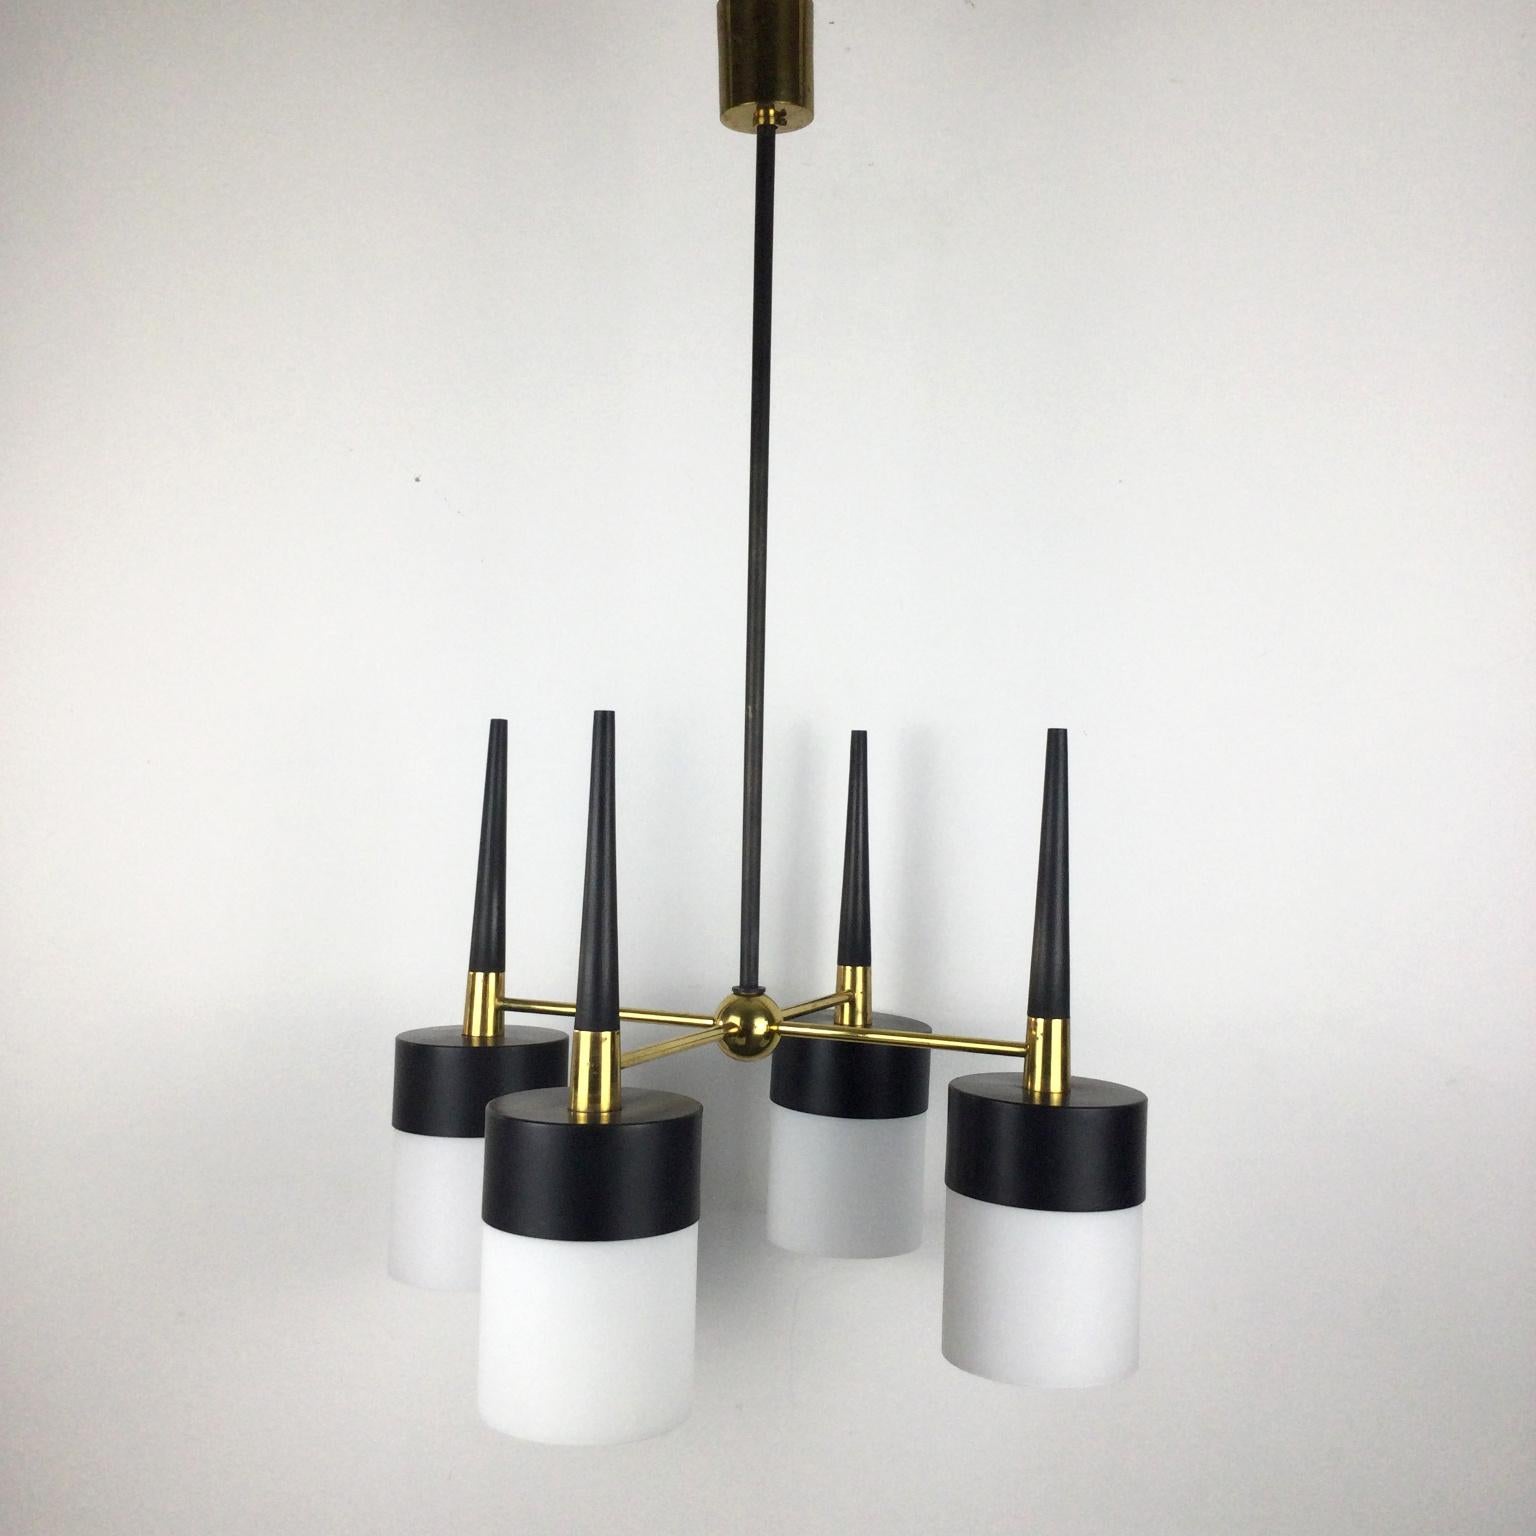 20th Century 1950s Arlus Ceiling Light with Four Opalines Glass Shade and Brass Finish